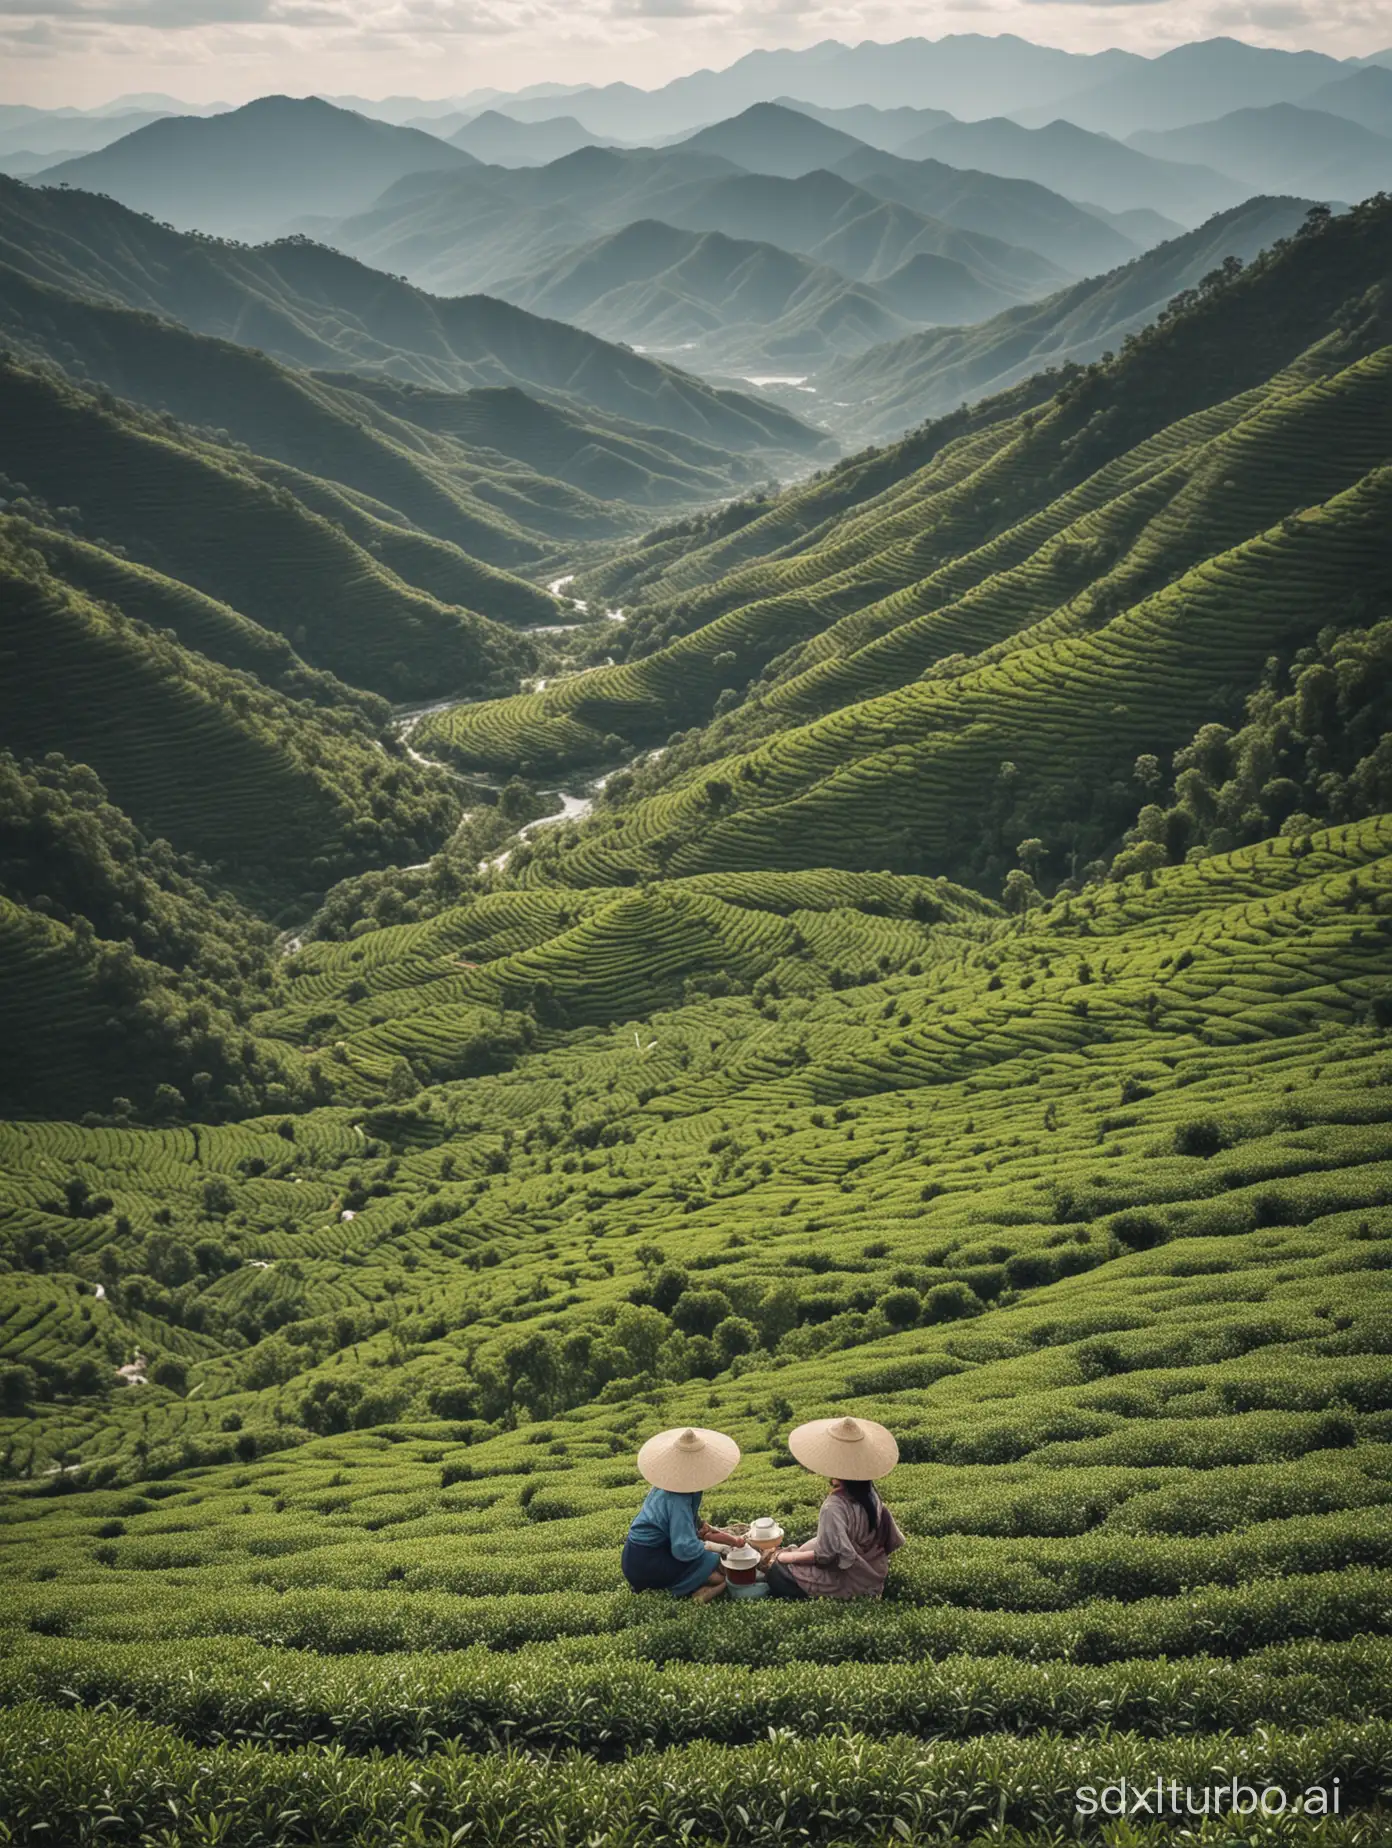 Tea mountains, where young girls pick tea leaves, are captured in a bird's-eye view. In the distance, mountains and rivers stretch far and wide.